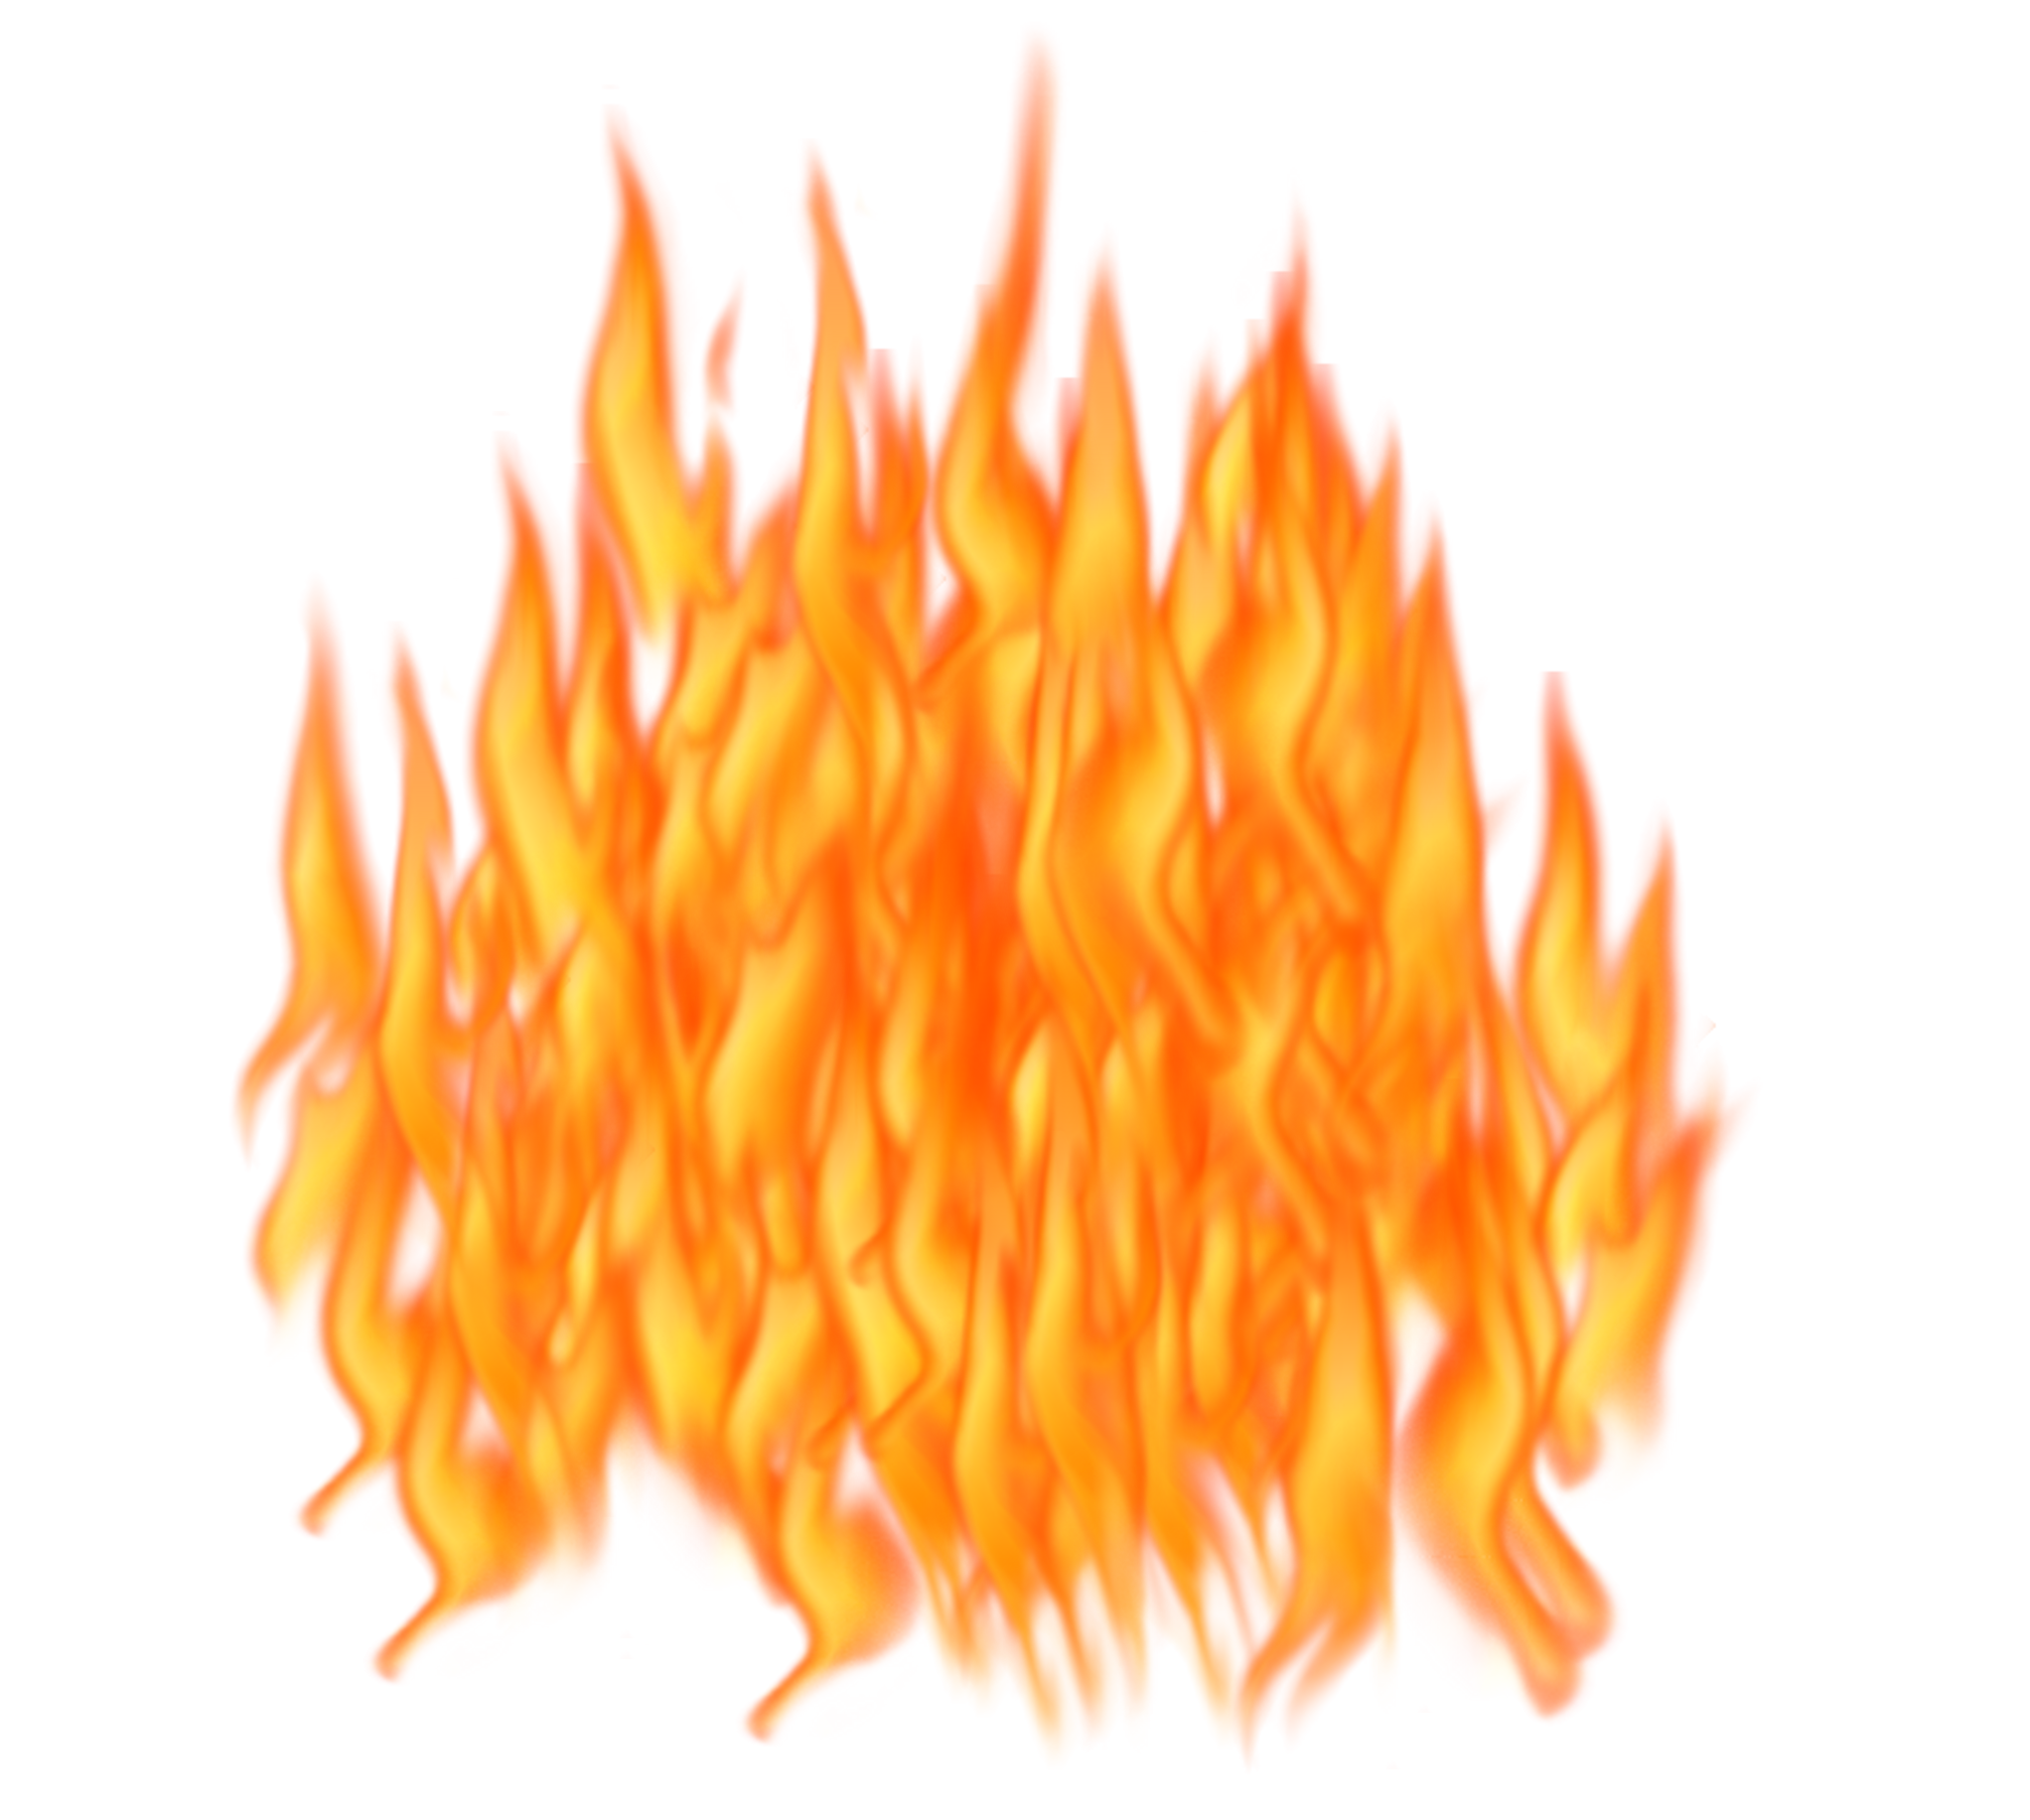 Fire flame PNG image free download 